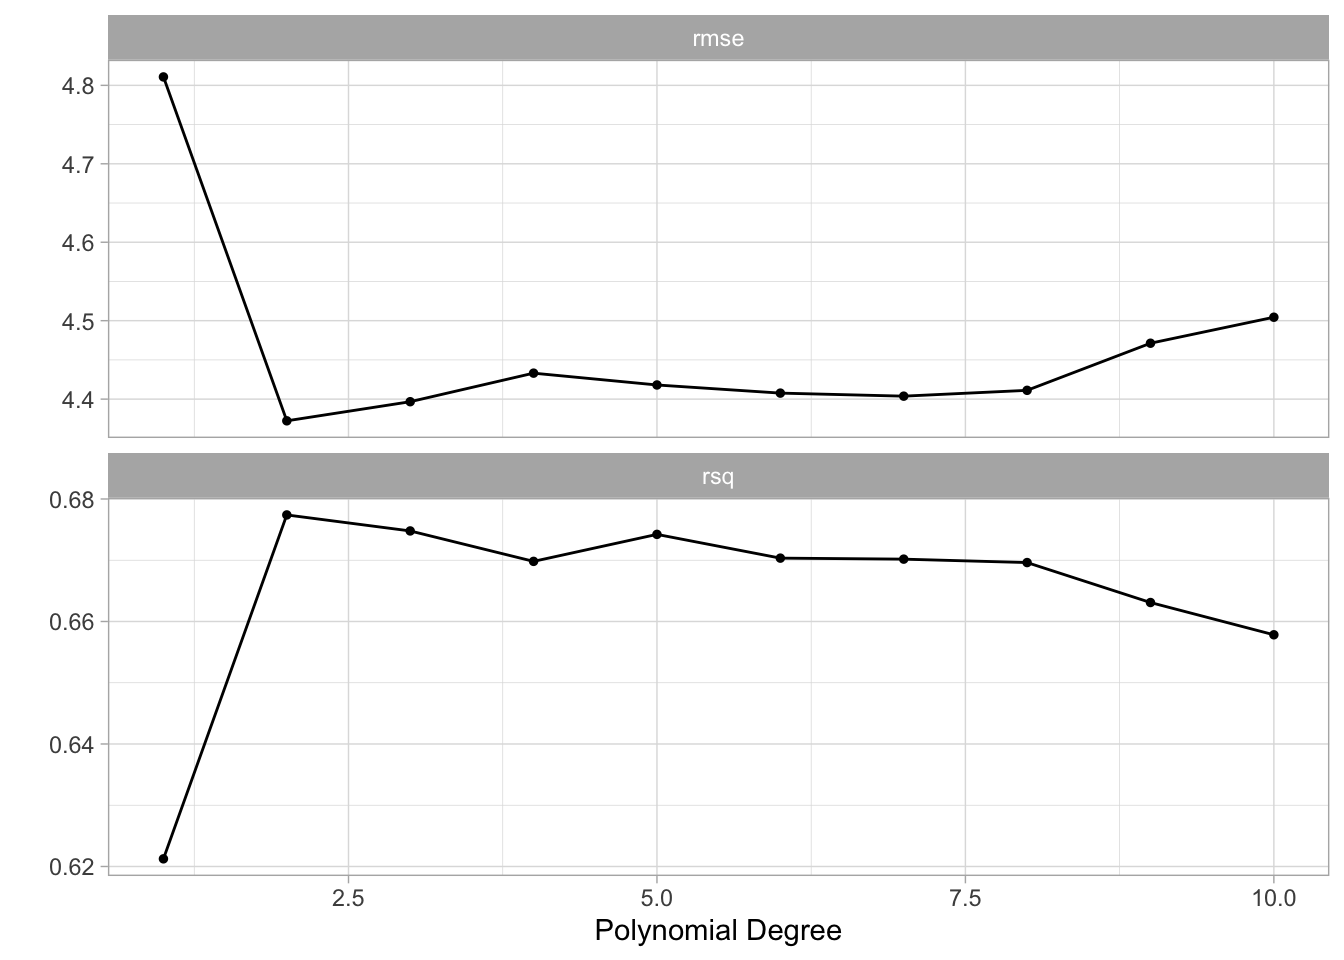 Facetted connected scatter chart. polynomial degree along the x-axis. Performance values along the y-axis. The facets are rmse and rsq. Both gets fairly even results for 2 and more degrees. Best performance is seen when degree == 1.